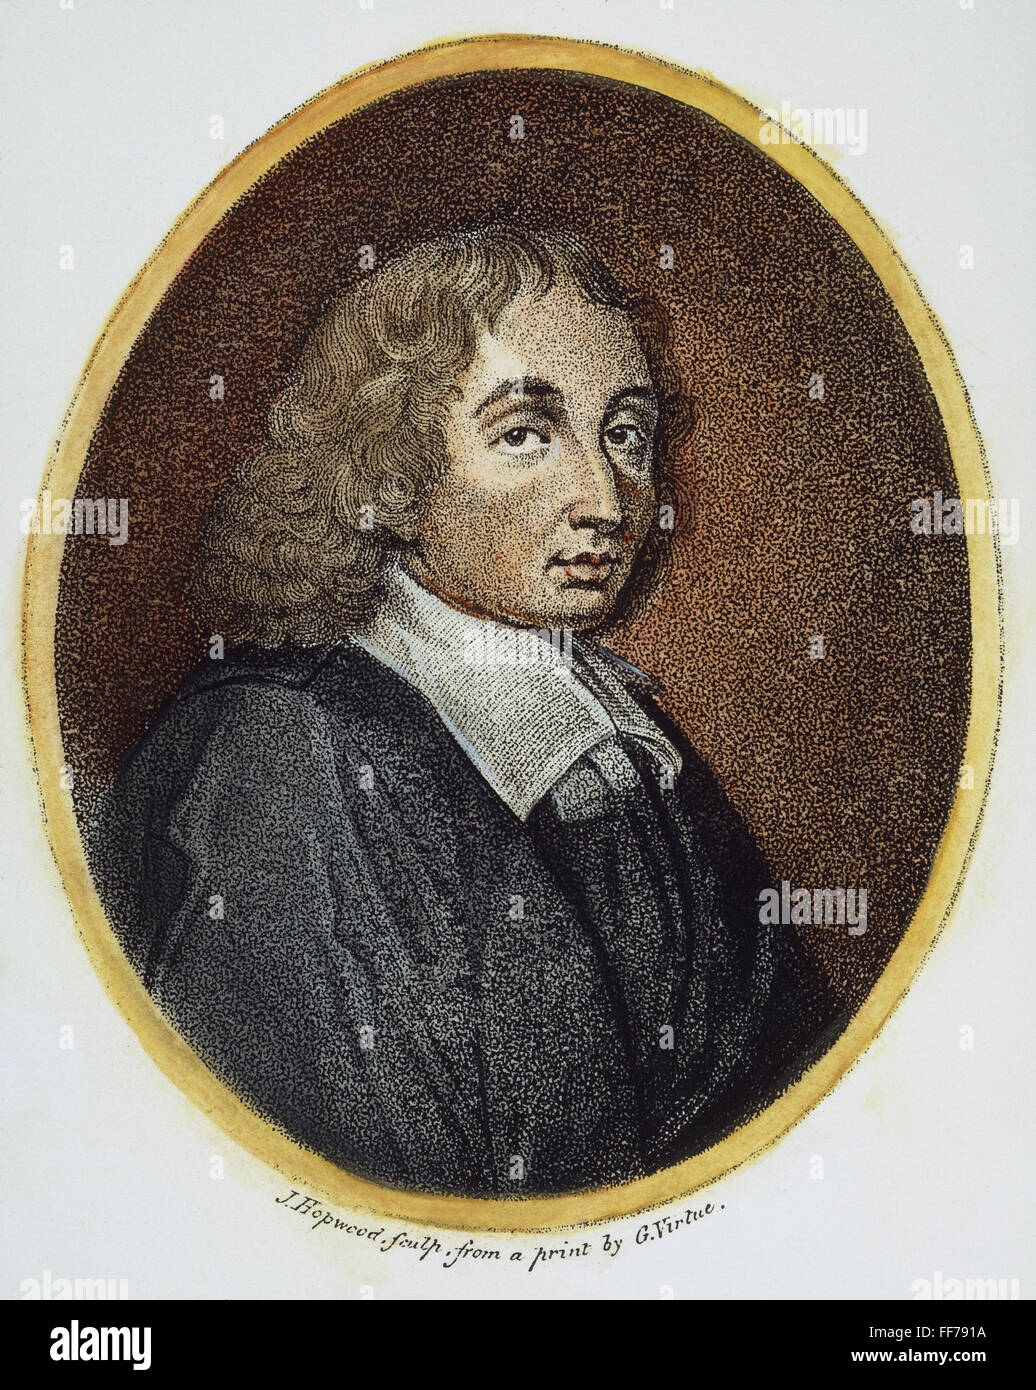 BLAISE PASCAL (1623-1662). /nFrench scientist and philosopher: stipple engraving, English, c1800. Stock Photo